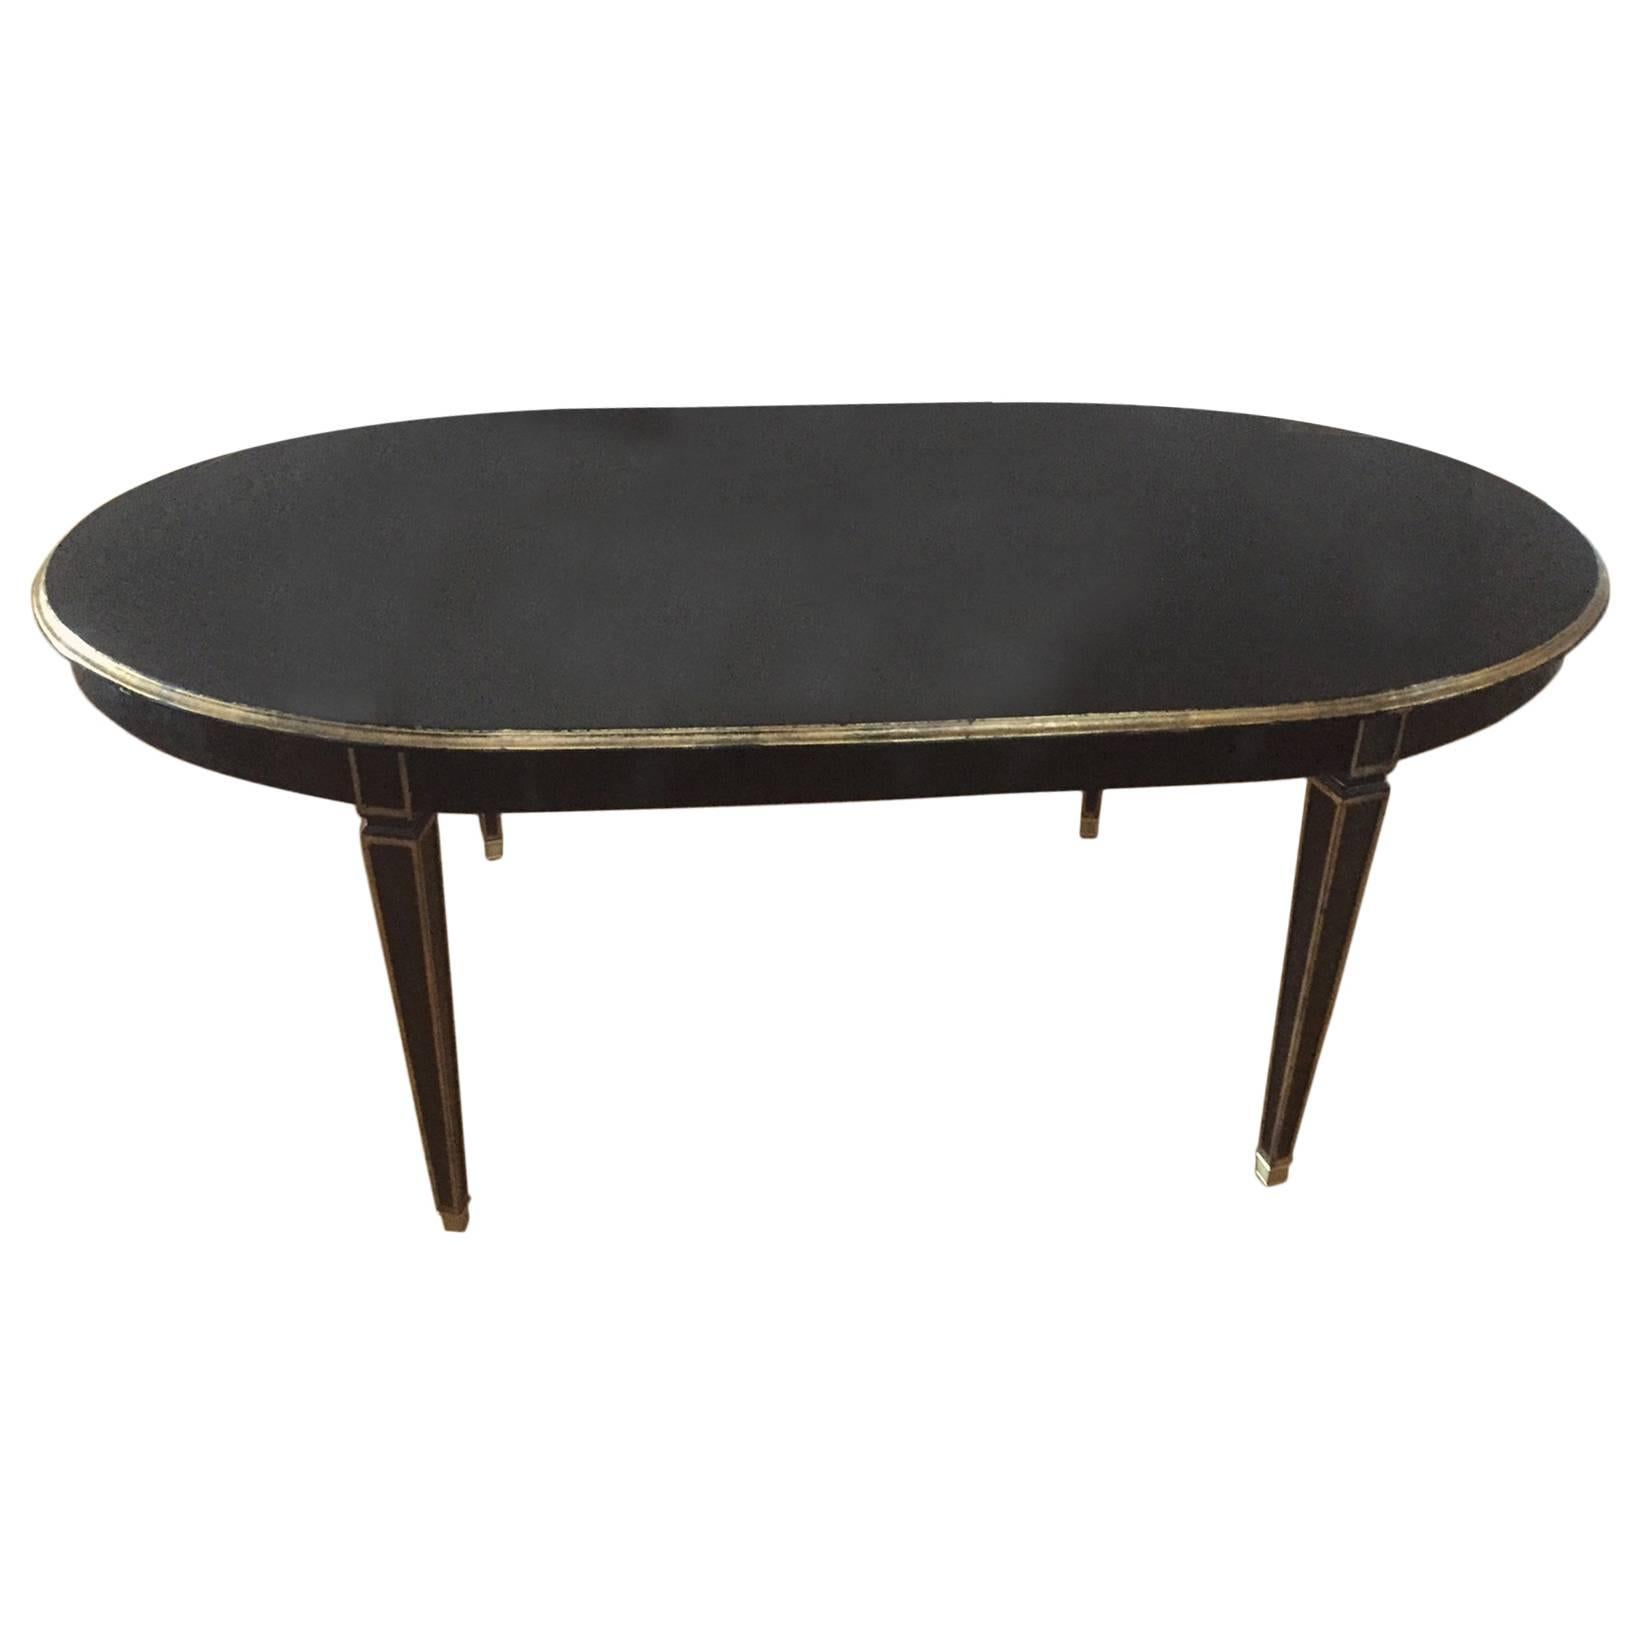 Louis XVI Style Dining Table in Black with Gilt Accents For Sale